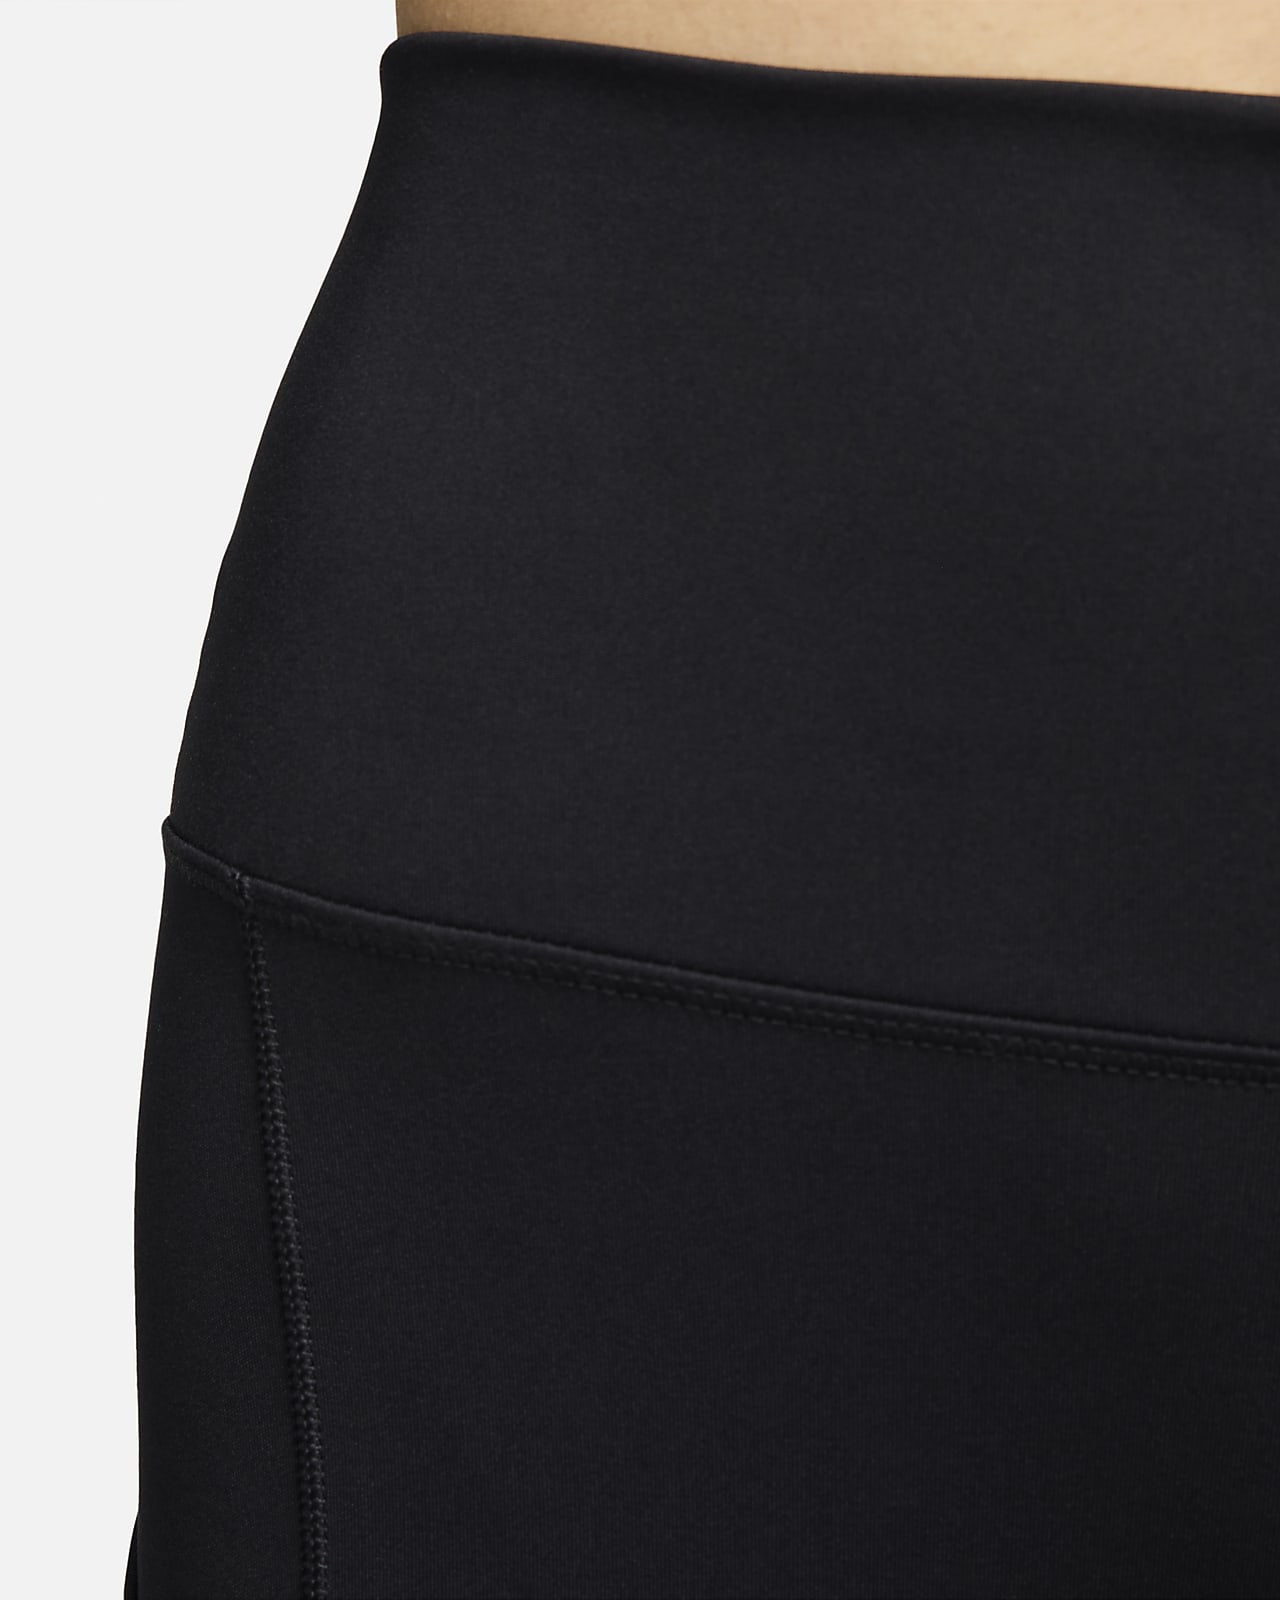 Nike One Women's High-Waisted 7/8 Leggings with Pockets.